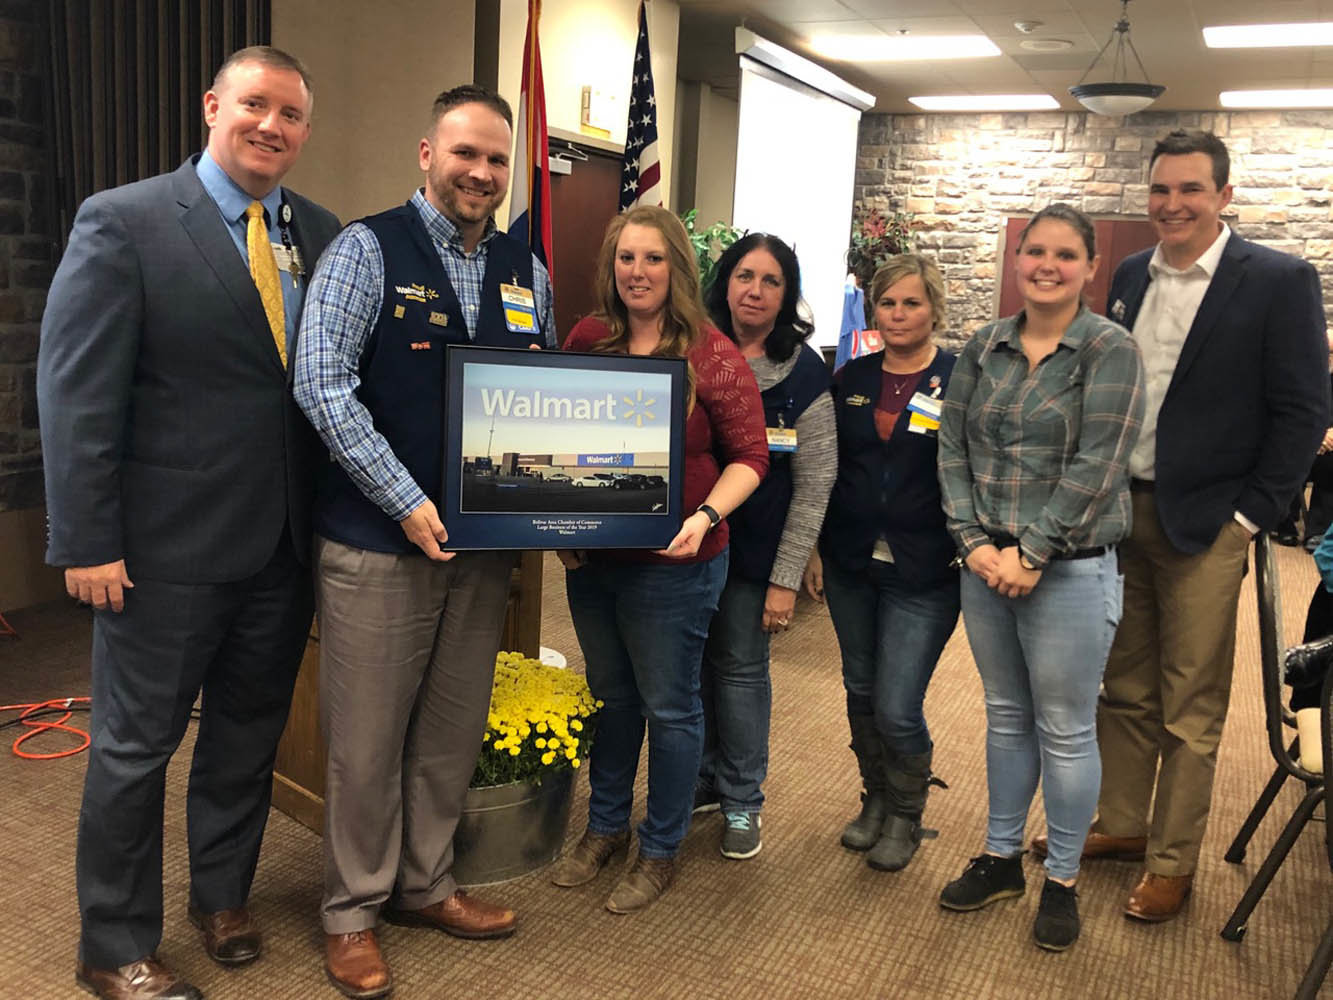 BOLIVAR’S TOP BUSINESSES
The Bolivar Area Chamber of Commerce honors Walmart as the 2019 Large Business of the Year and Comfort Inn as the Small Business of the Year during a Nov. 14 luncheon. Above, Walmart General Manager Chris Asby and Assistant Manager Kristen Smith, second and third from left, accept the plaque, along with colleagues Nancy Sapp, Brandy Sanders and Kaslyn Alexander.